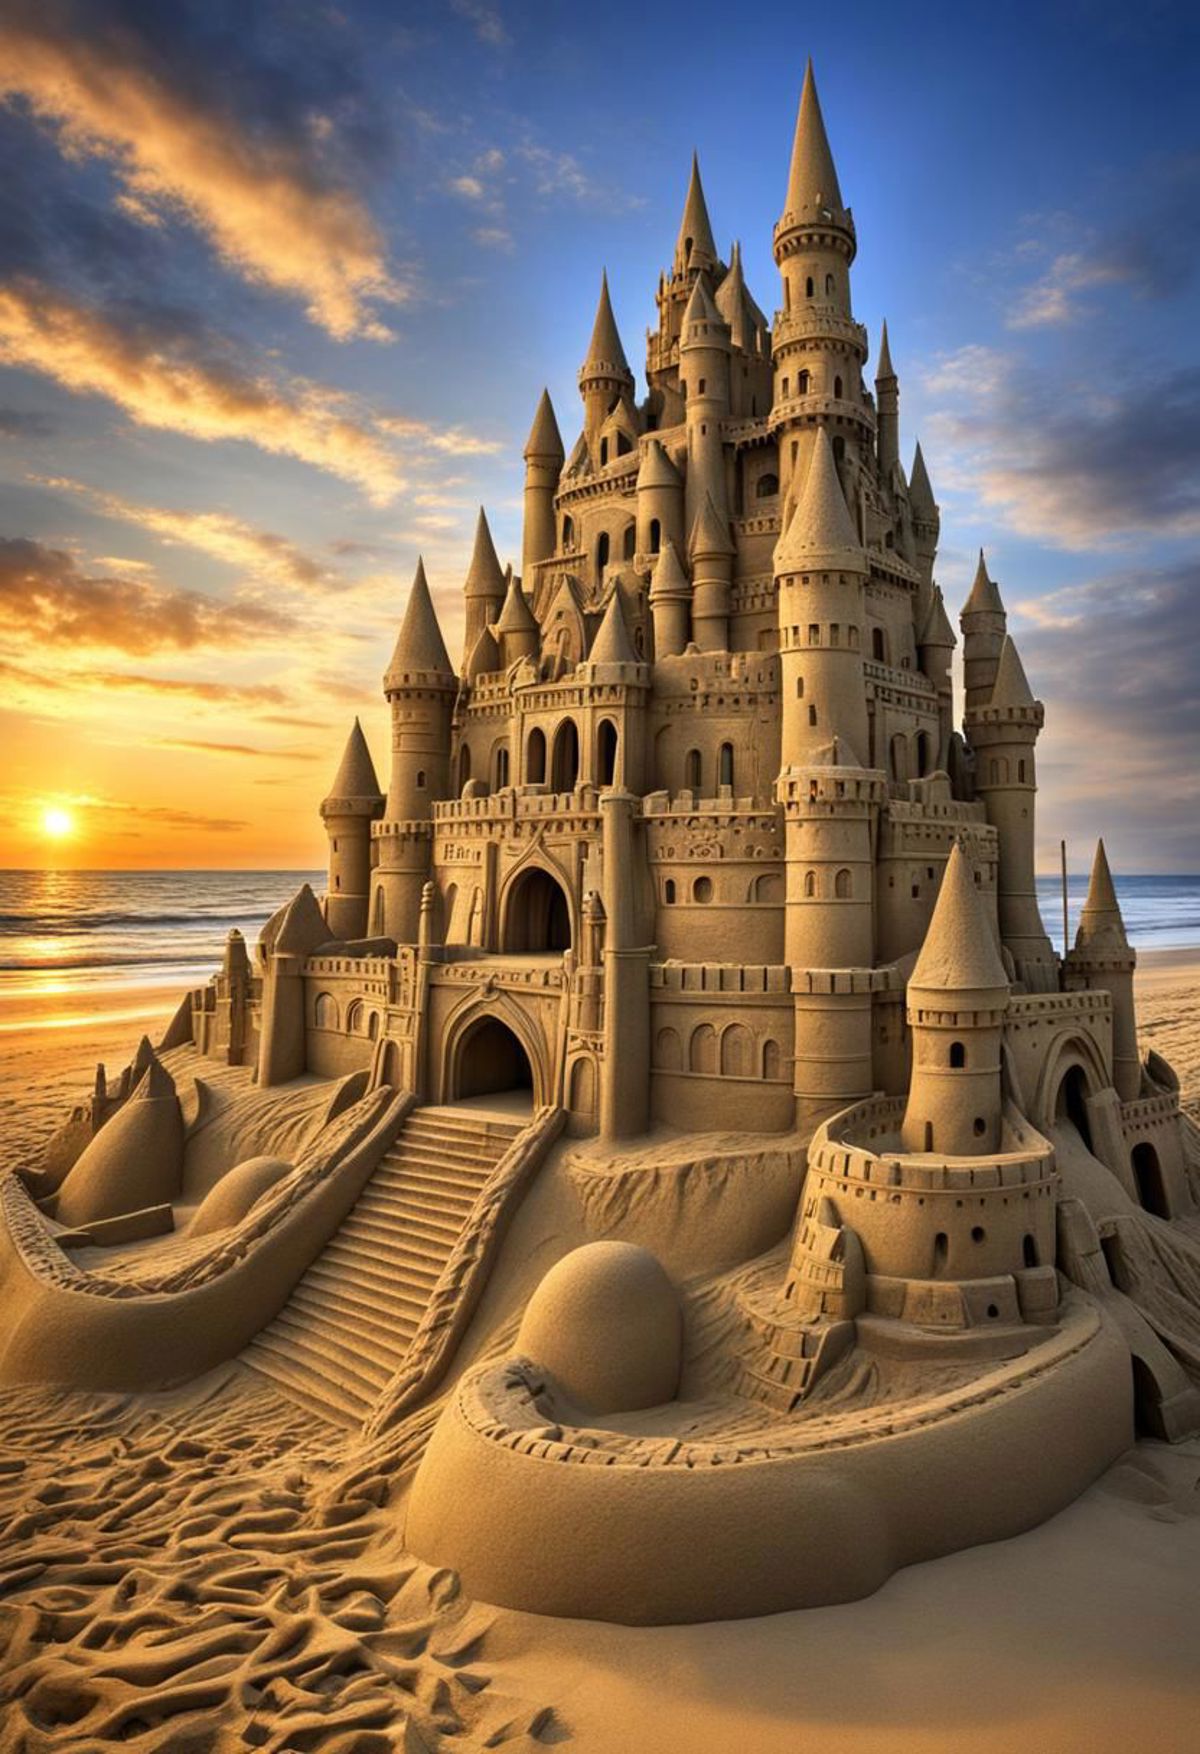 A sand castle with a moat and a sunset in the background.